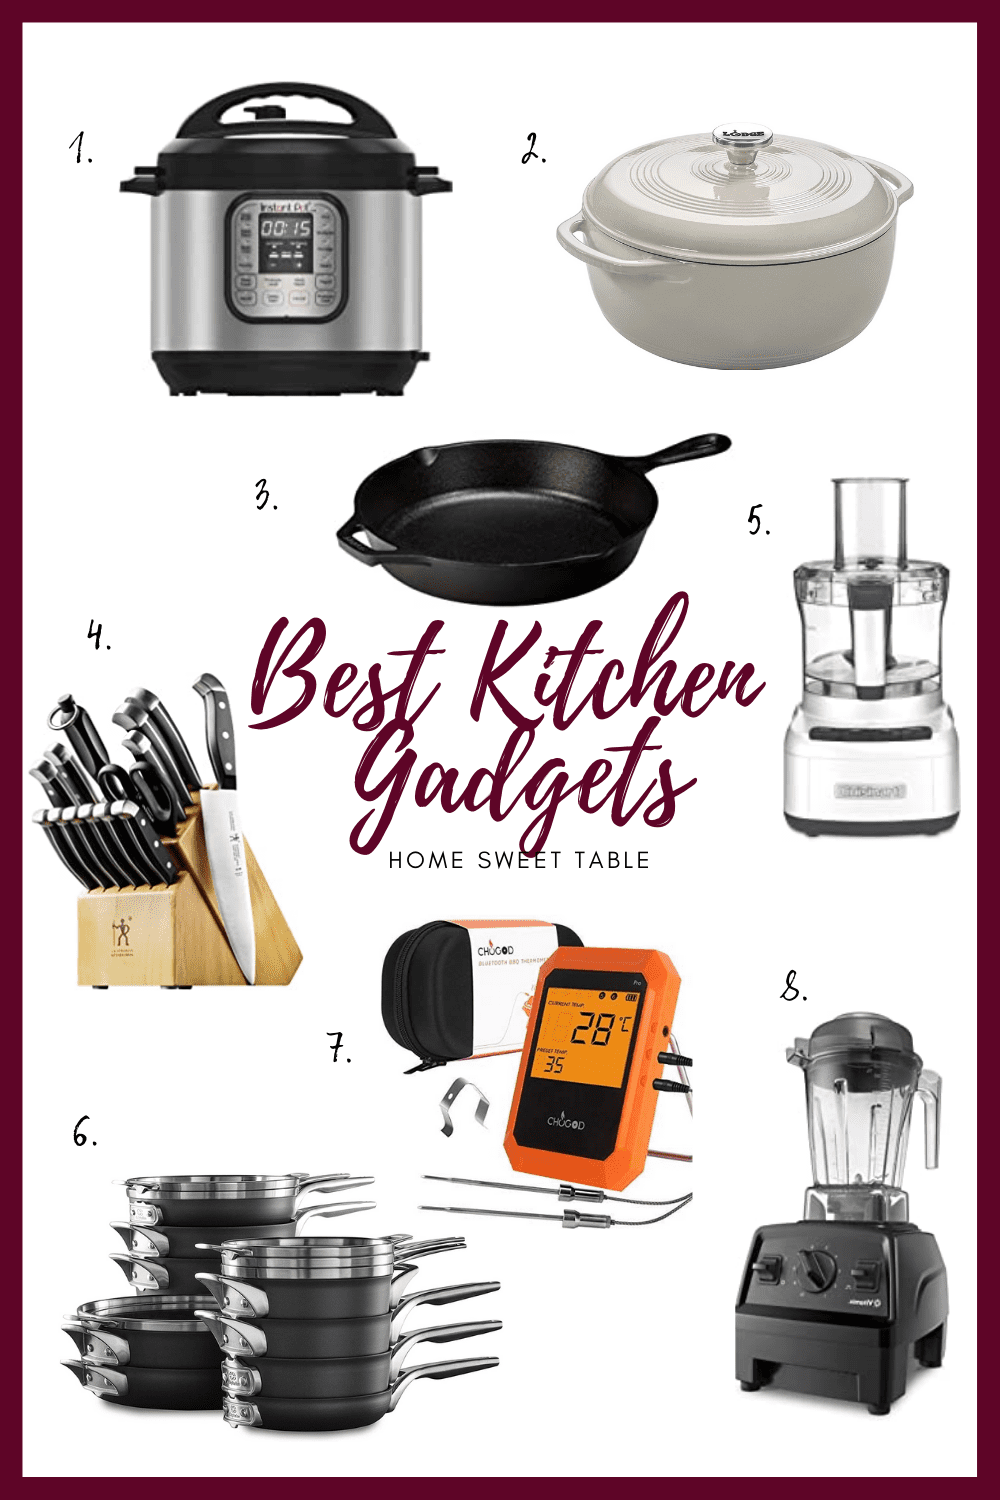 https://homesweettable.com/wp-content/uploads/2021/11/kitchen-gifts-7.png